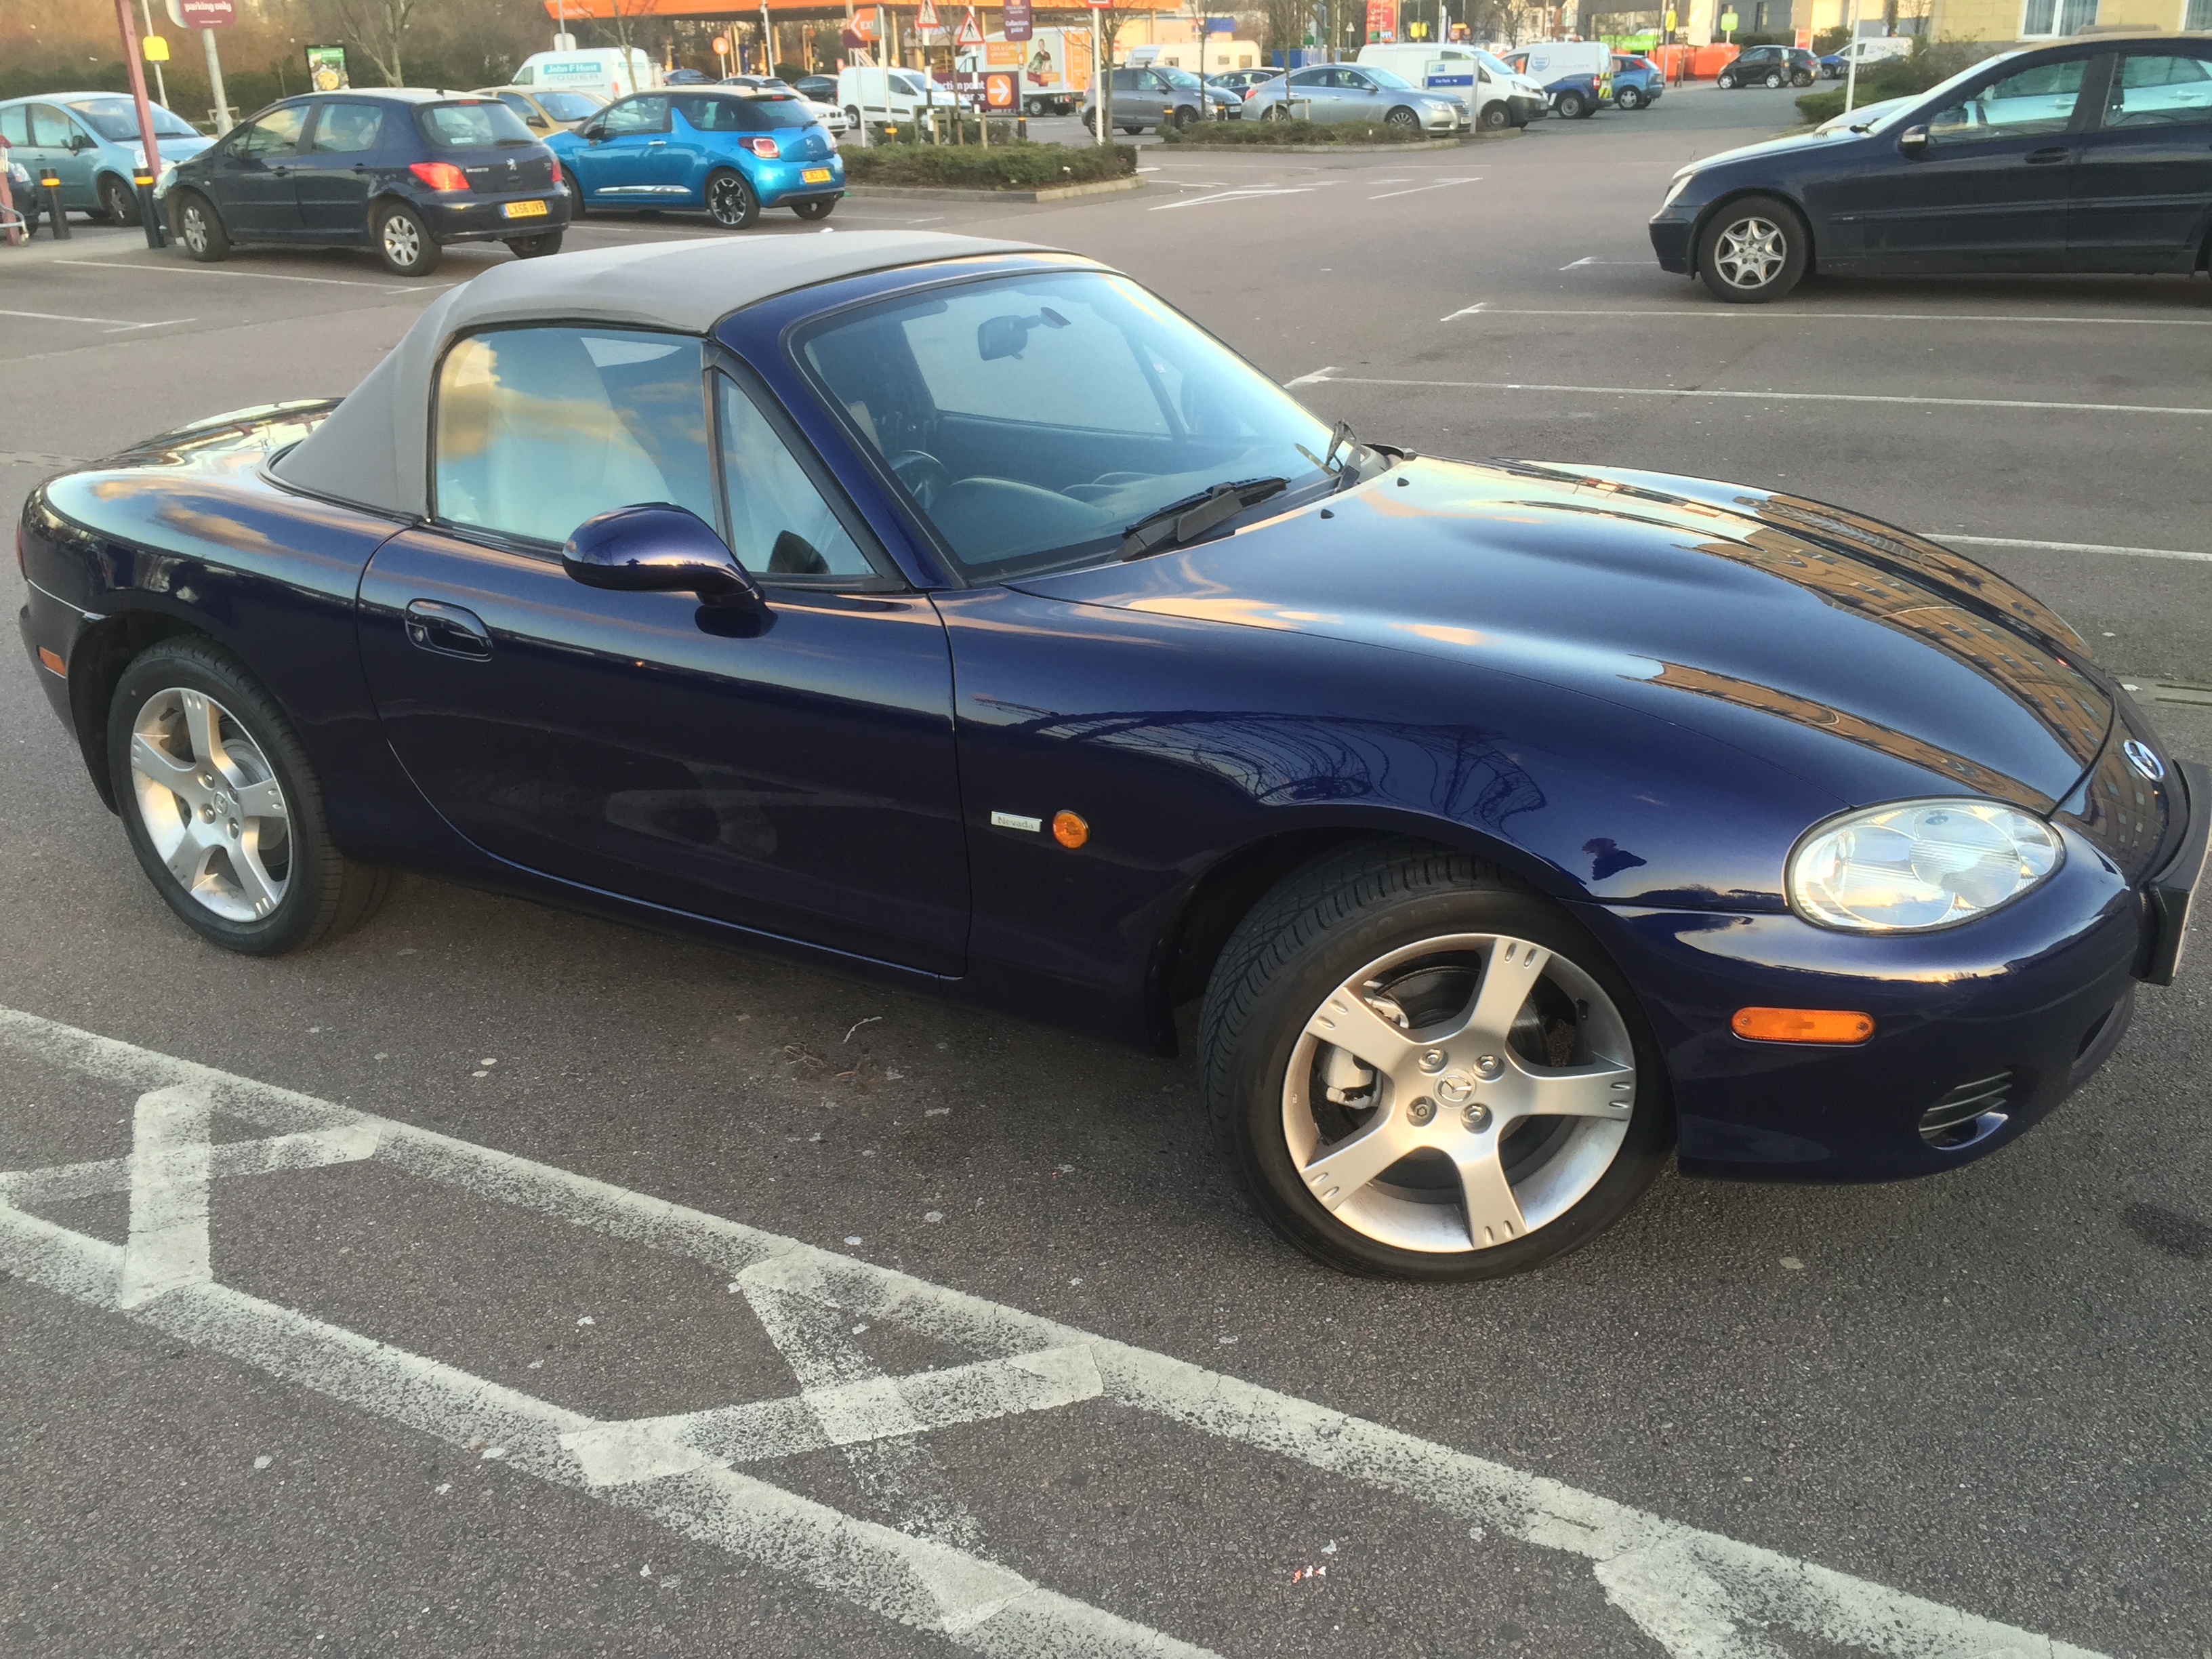 MX5 Mk2.5 Starto Blue Nevada with Grey Mohair soft top and colour coded hardtop - & Roadsters For Sale - MX-5 Owners Forum